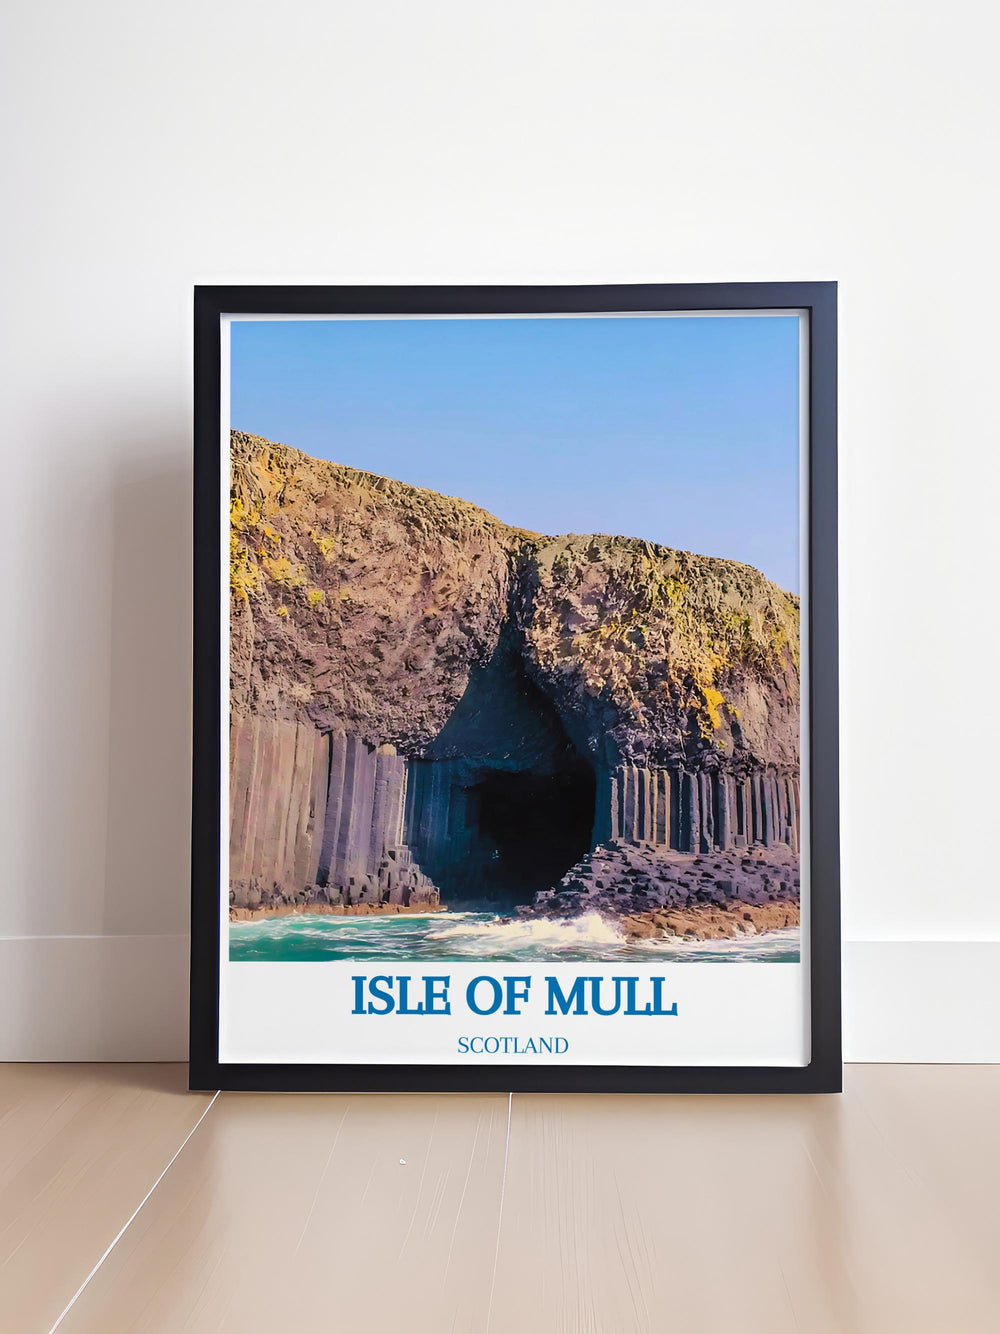 Home decor featuring the natural architecture of Fingals Cave with its striking basalt columns ideal for adding a touch of natures art to your walls